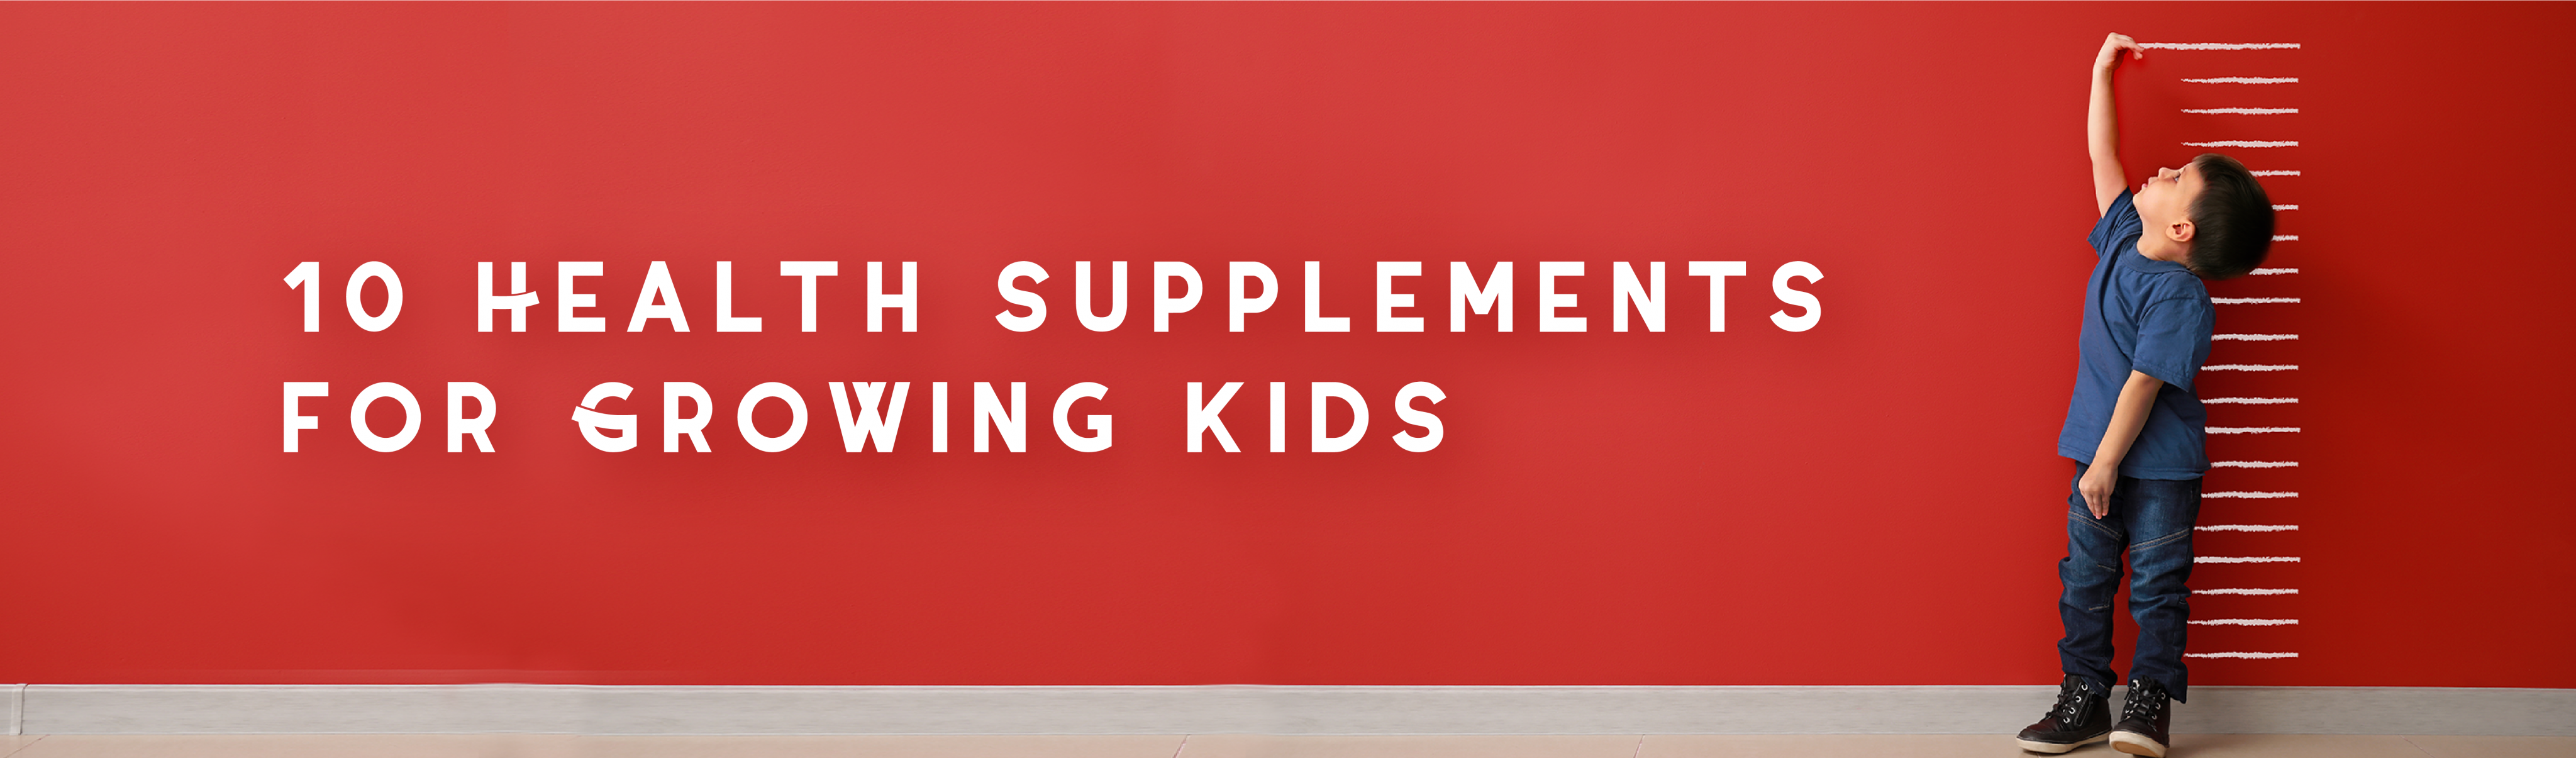 10 Health Supplements for Growing Kids